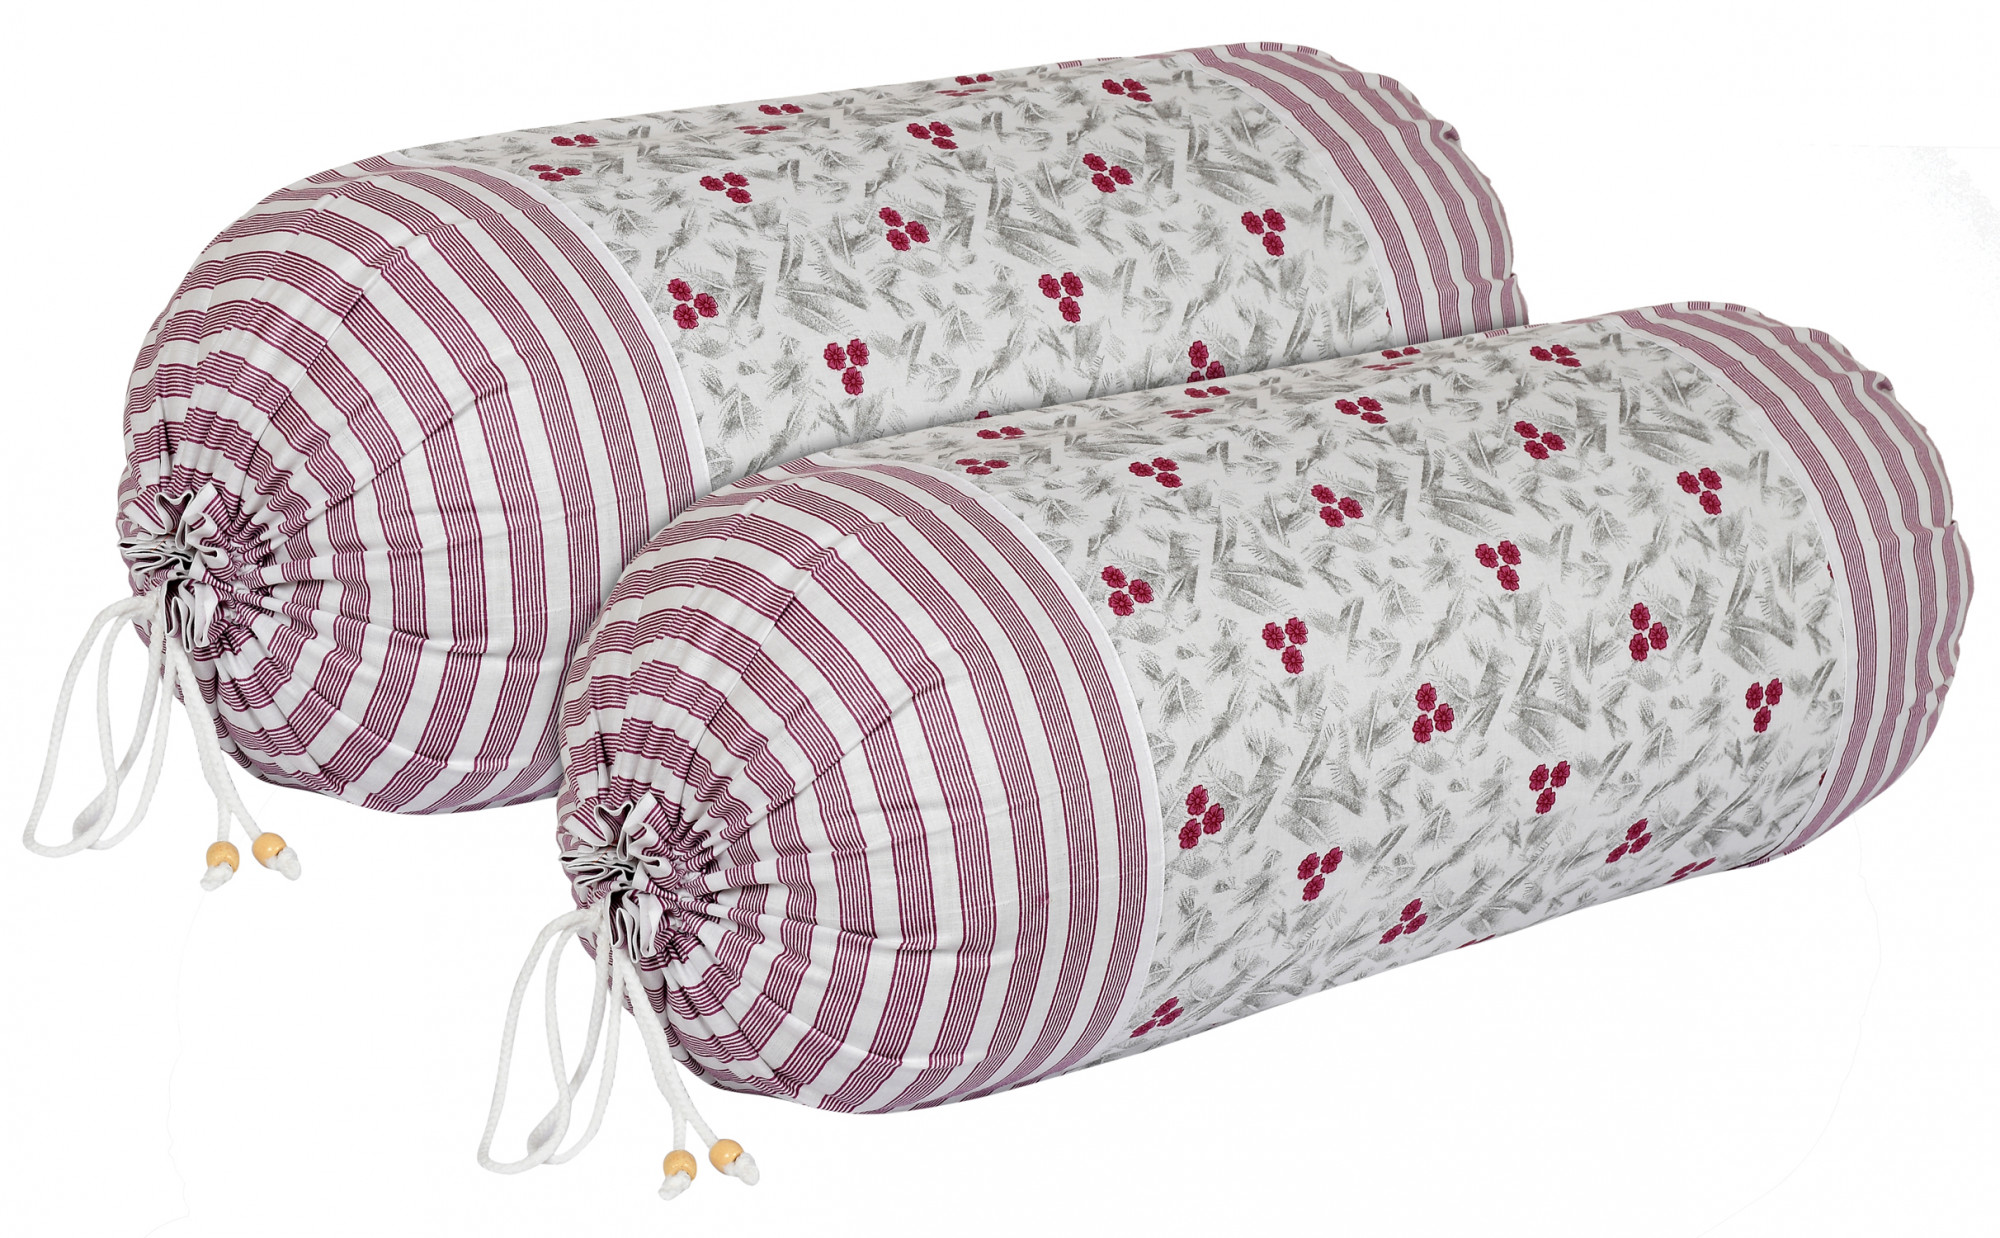 Kuber Industries Floral Design Premium Cotton Bolster Covers, 16 x 30 inch,(Pink)